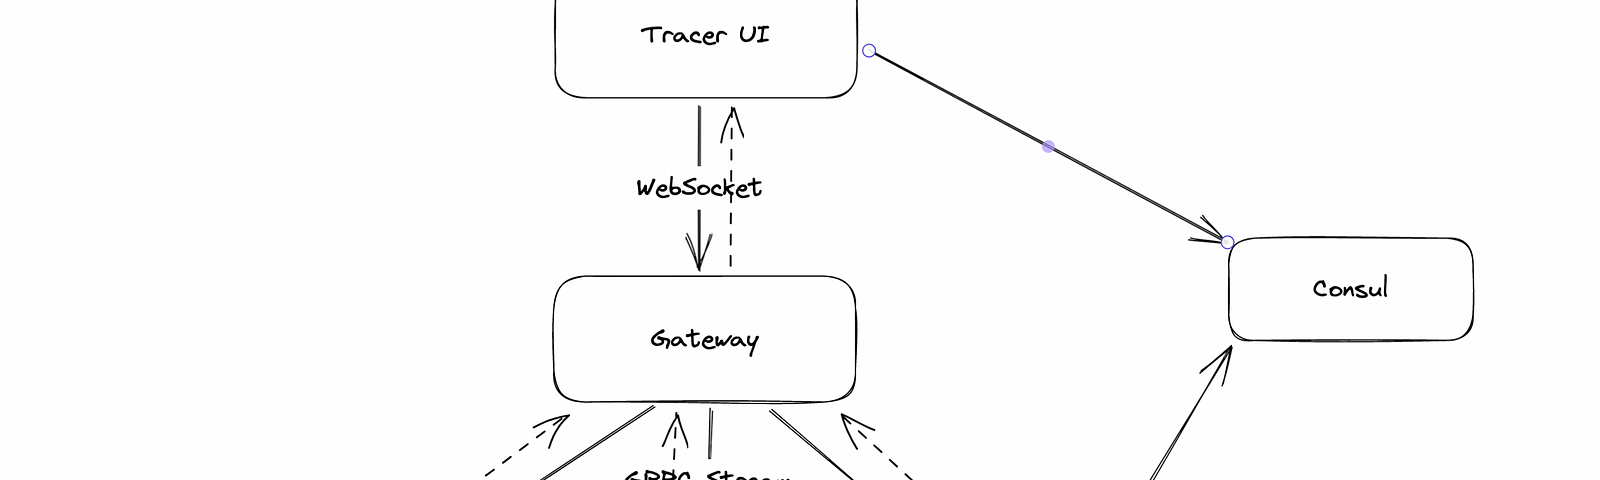 To summarize the flow in the Image-0, a WebSocket connection is established from the frontend to the gateway application. From the gateway application, an HTTP request is simultaneously transferred over gRPC to the agents we call Sniffer.